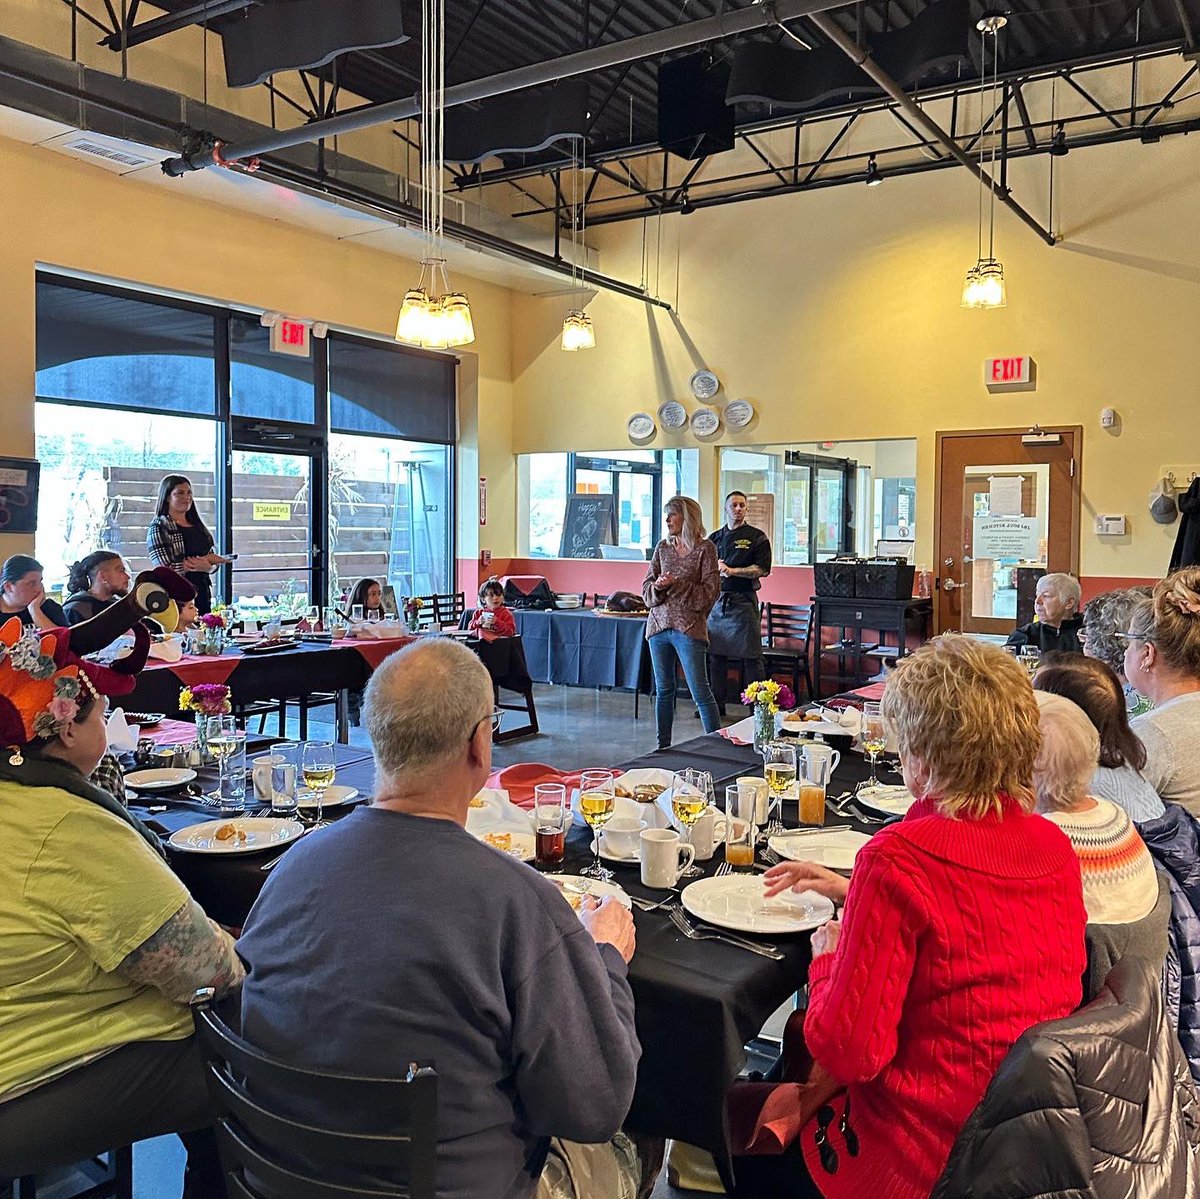 Giving thanks with JBJ Soul Kitchen’s annual Soul Family Thanksgiving meal at our Red Bank and Toms River locations! Together, we celebrated the spirit of community, generosity, and the joy of sharing a meal with our patrons. 🧡